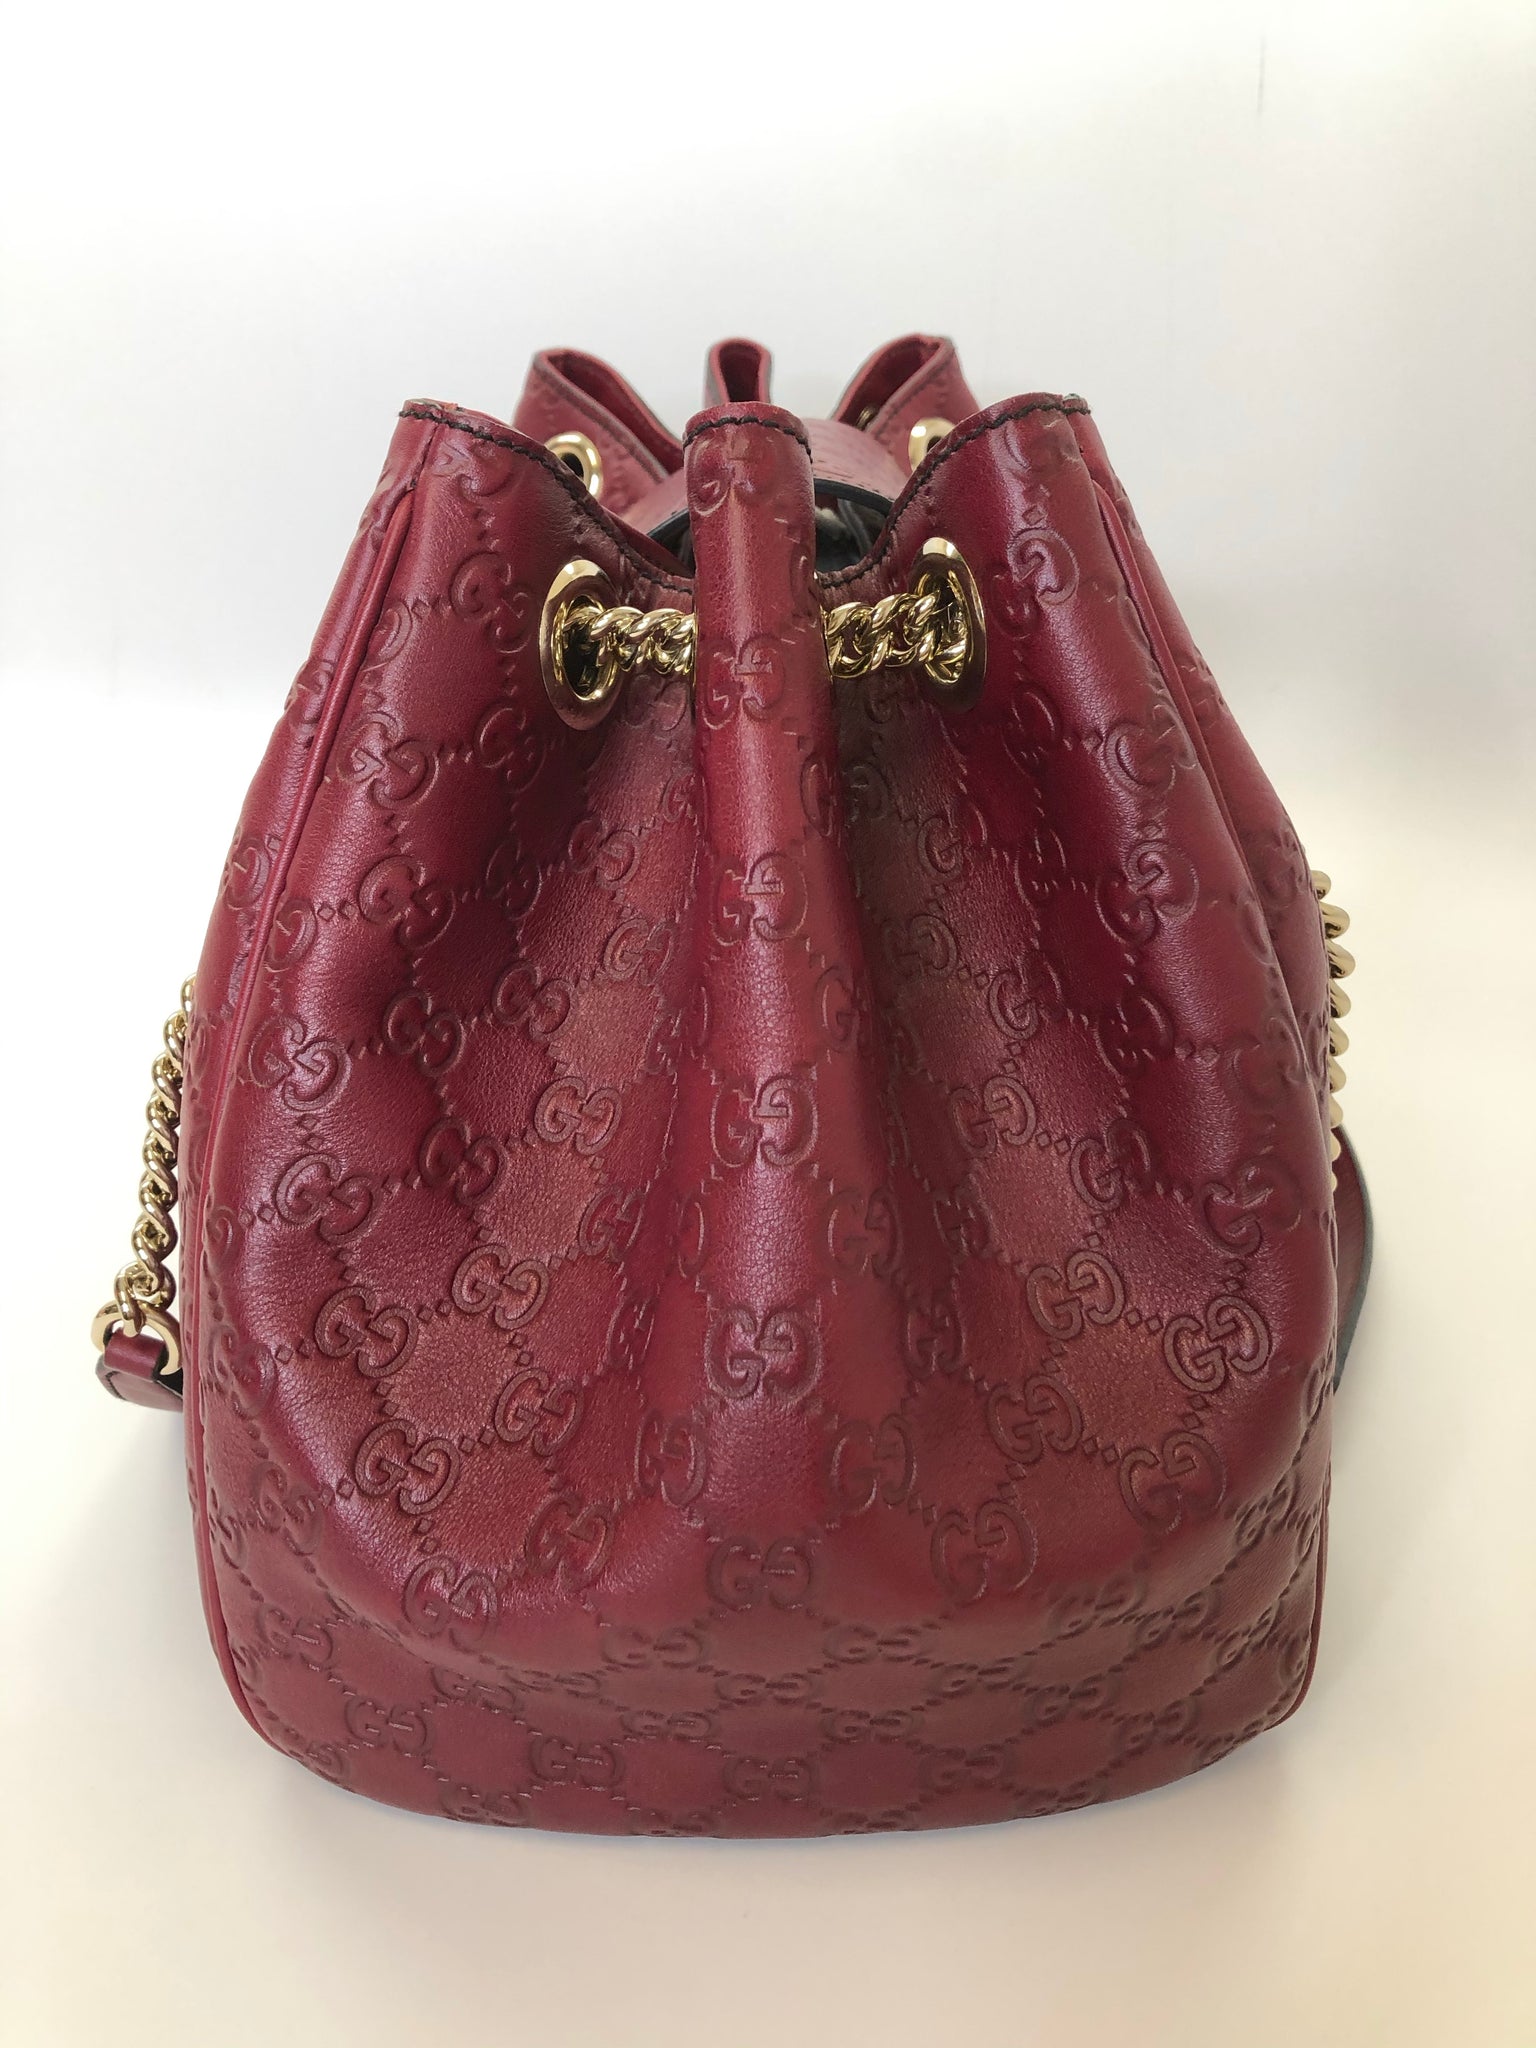 Gucci Emily Chain Flap Shoulder Bag Guccissima Leather Large Red